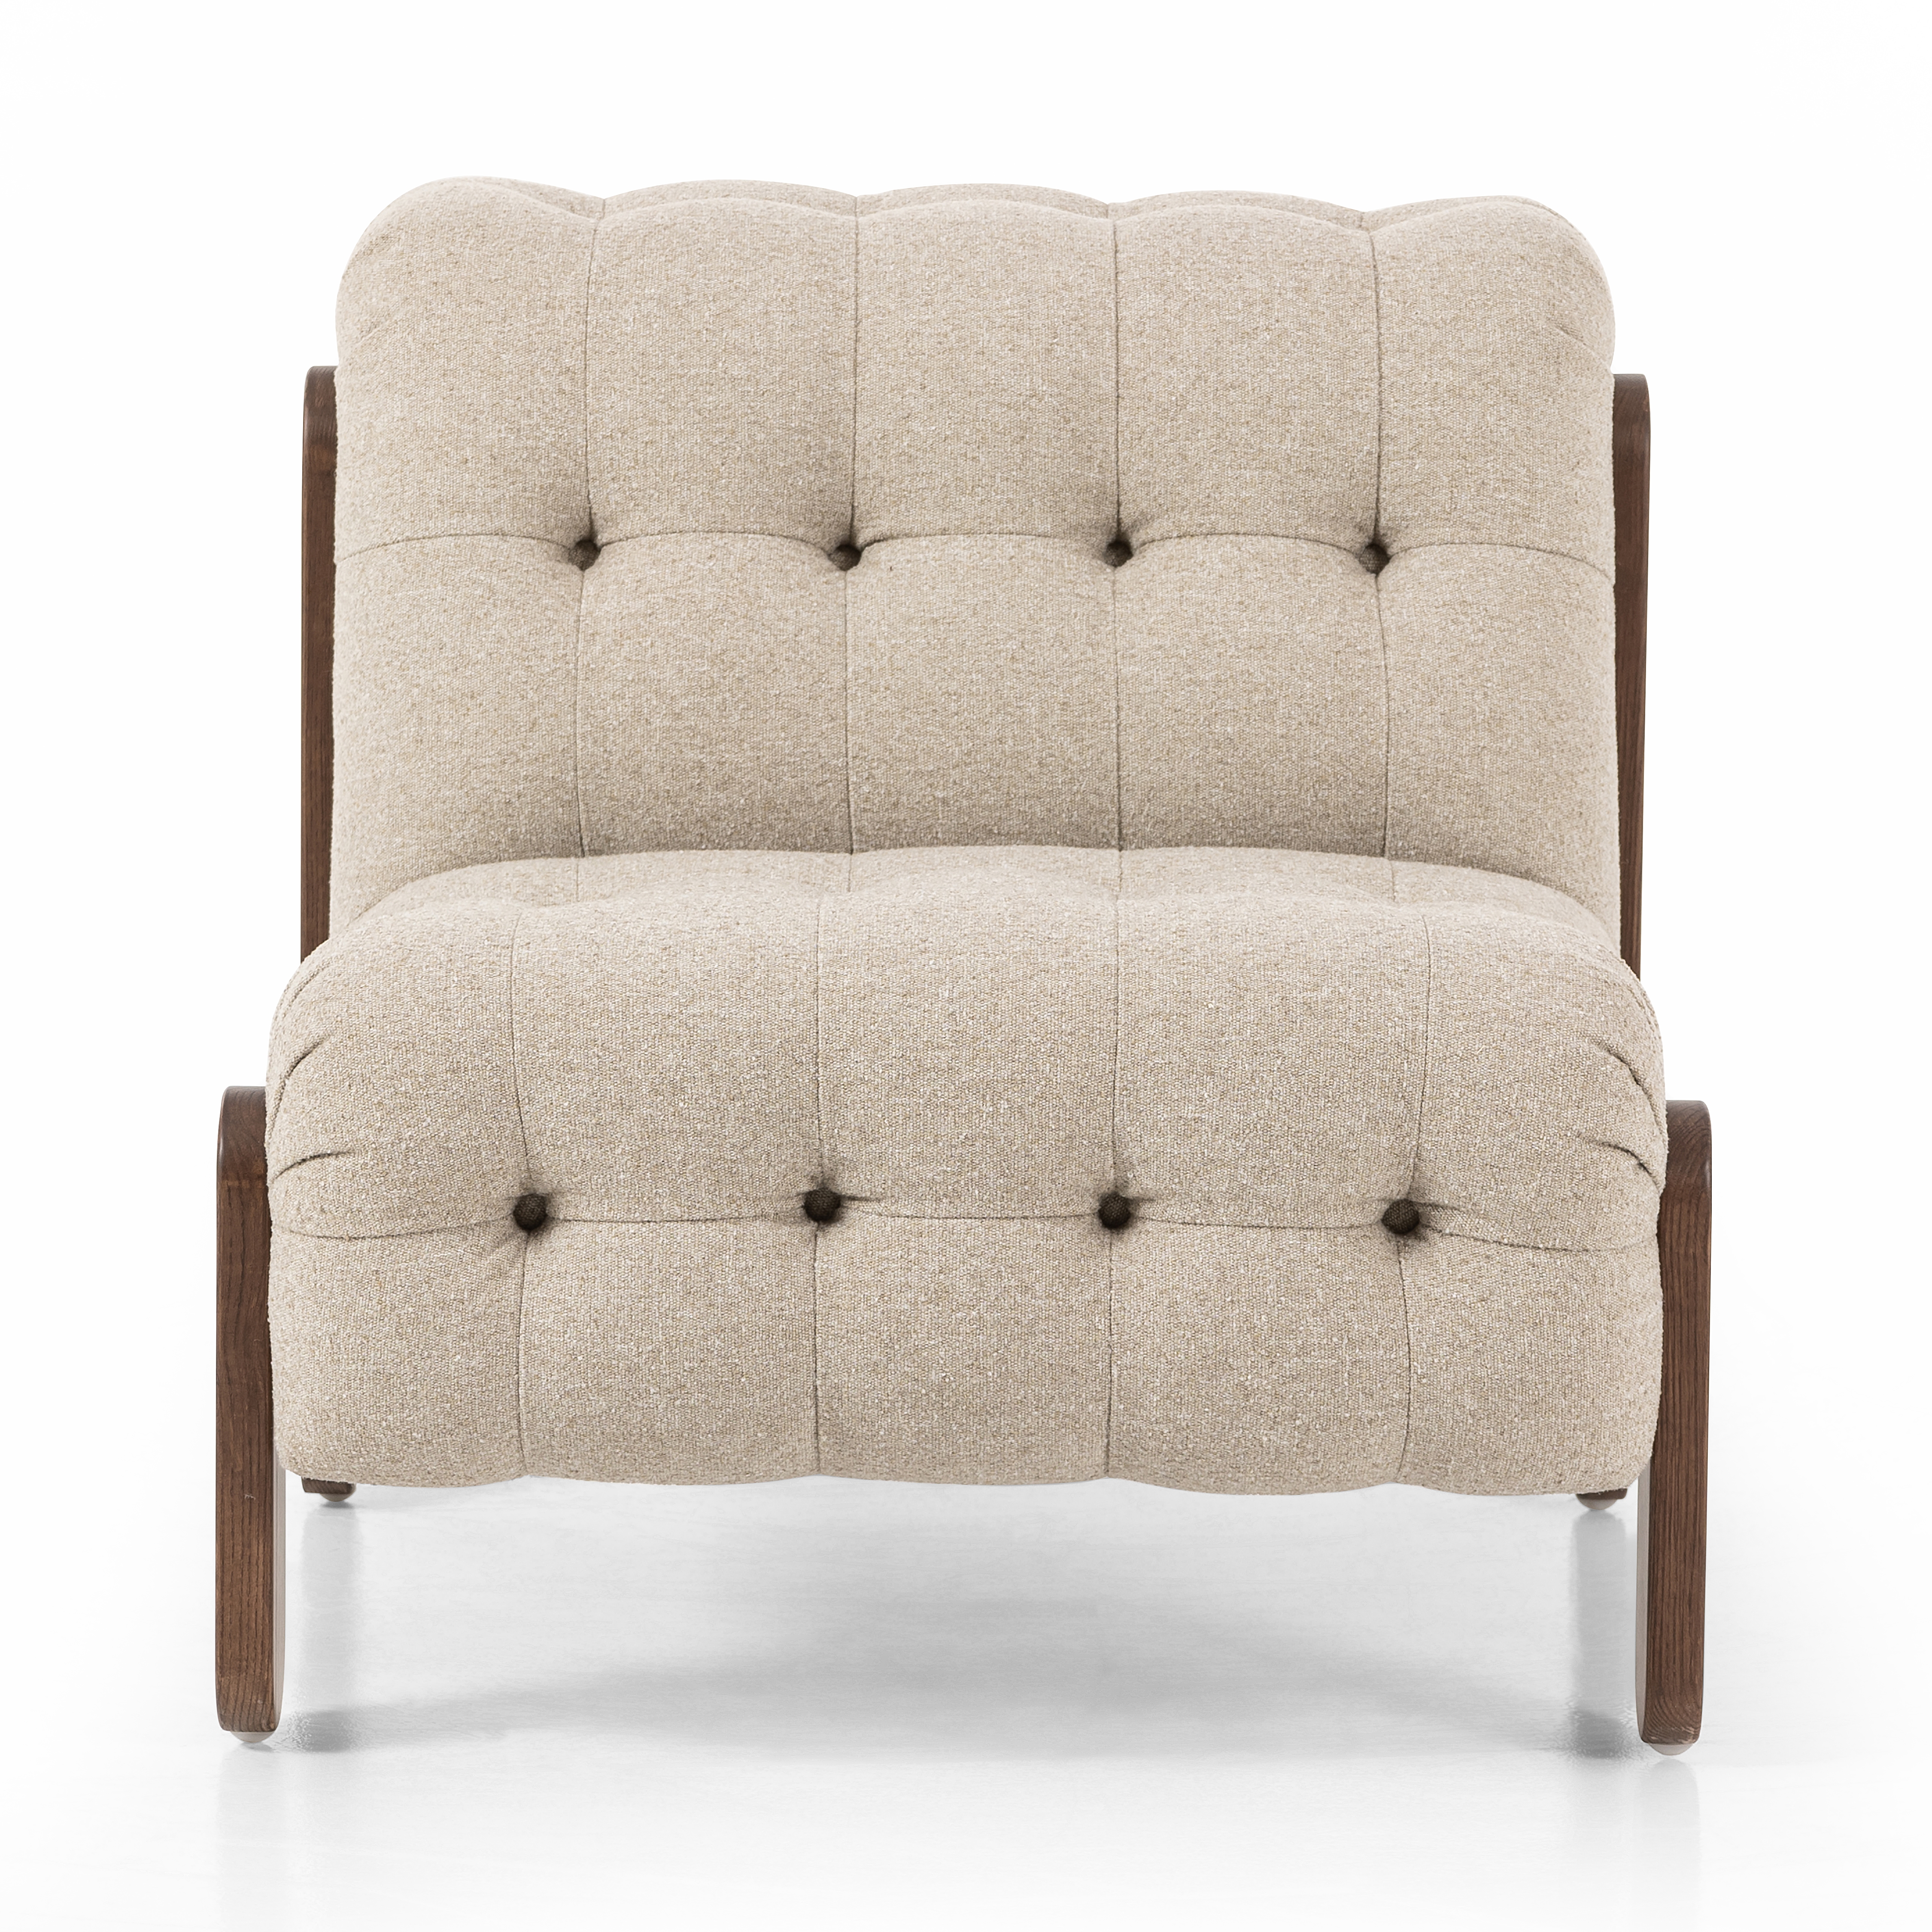 Jeremiah Chair-Weslie Flax - Image 3